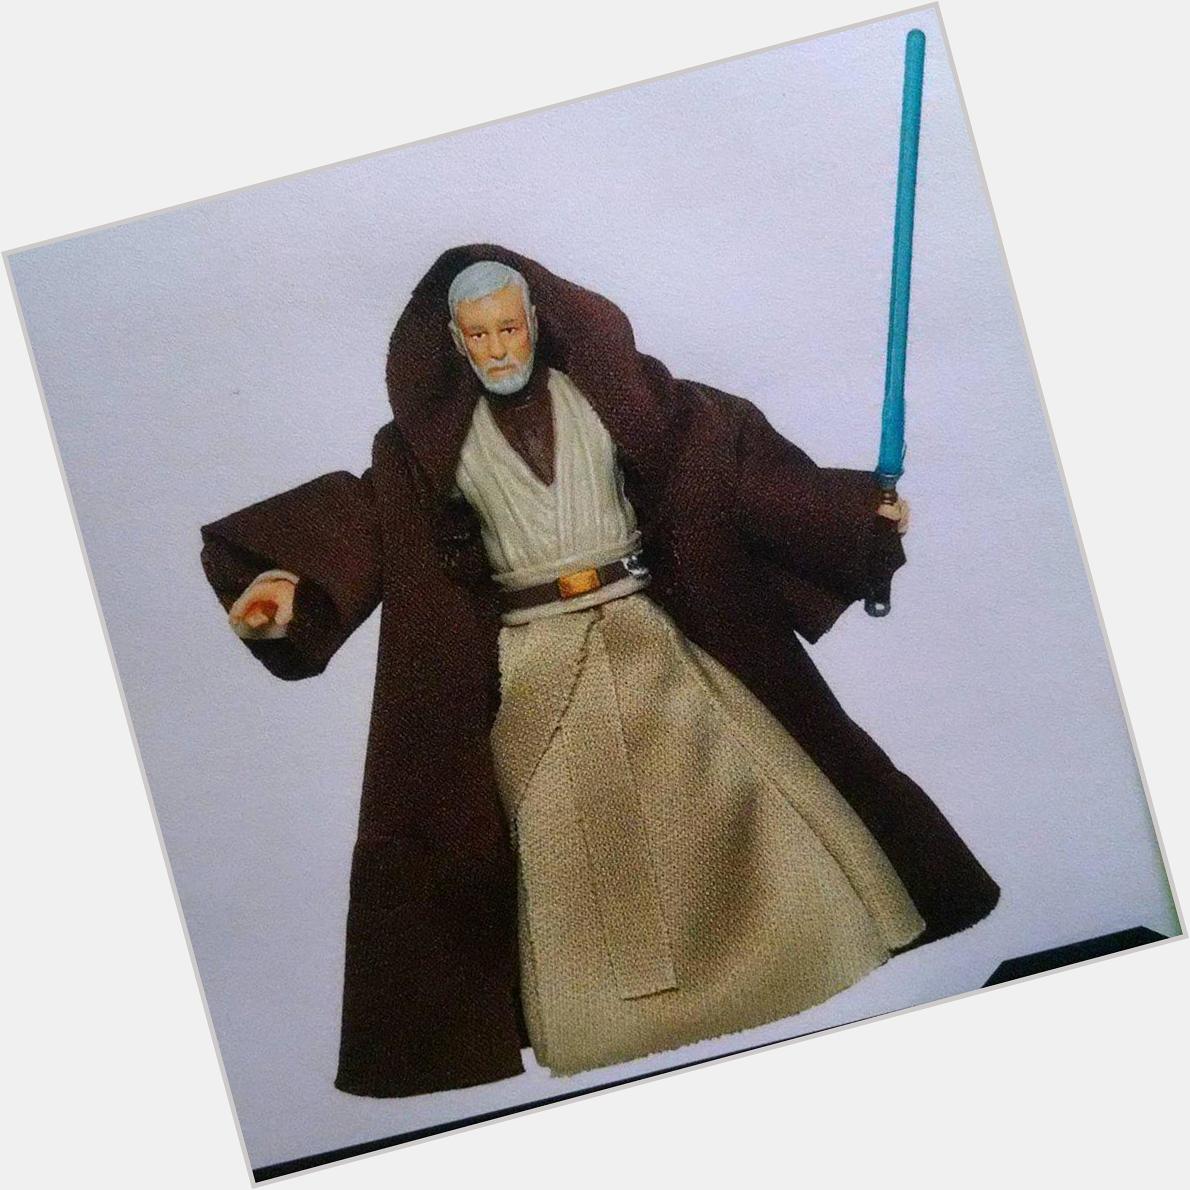 Excellent Obi Wan Figure From Legacy Collection & Also Happy Birthday To Gary Kurtz Today! 